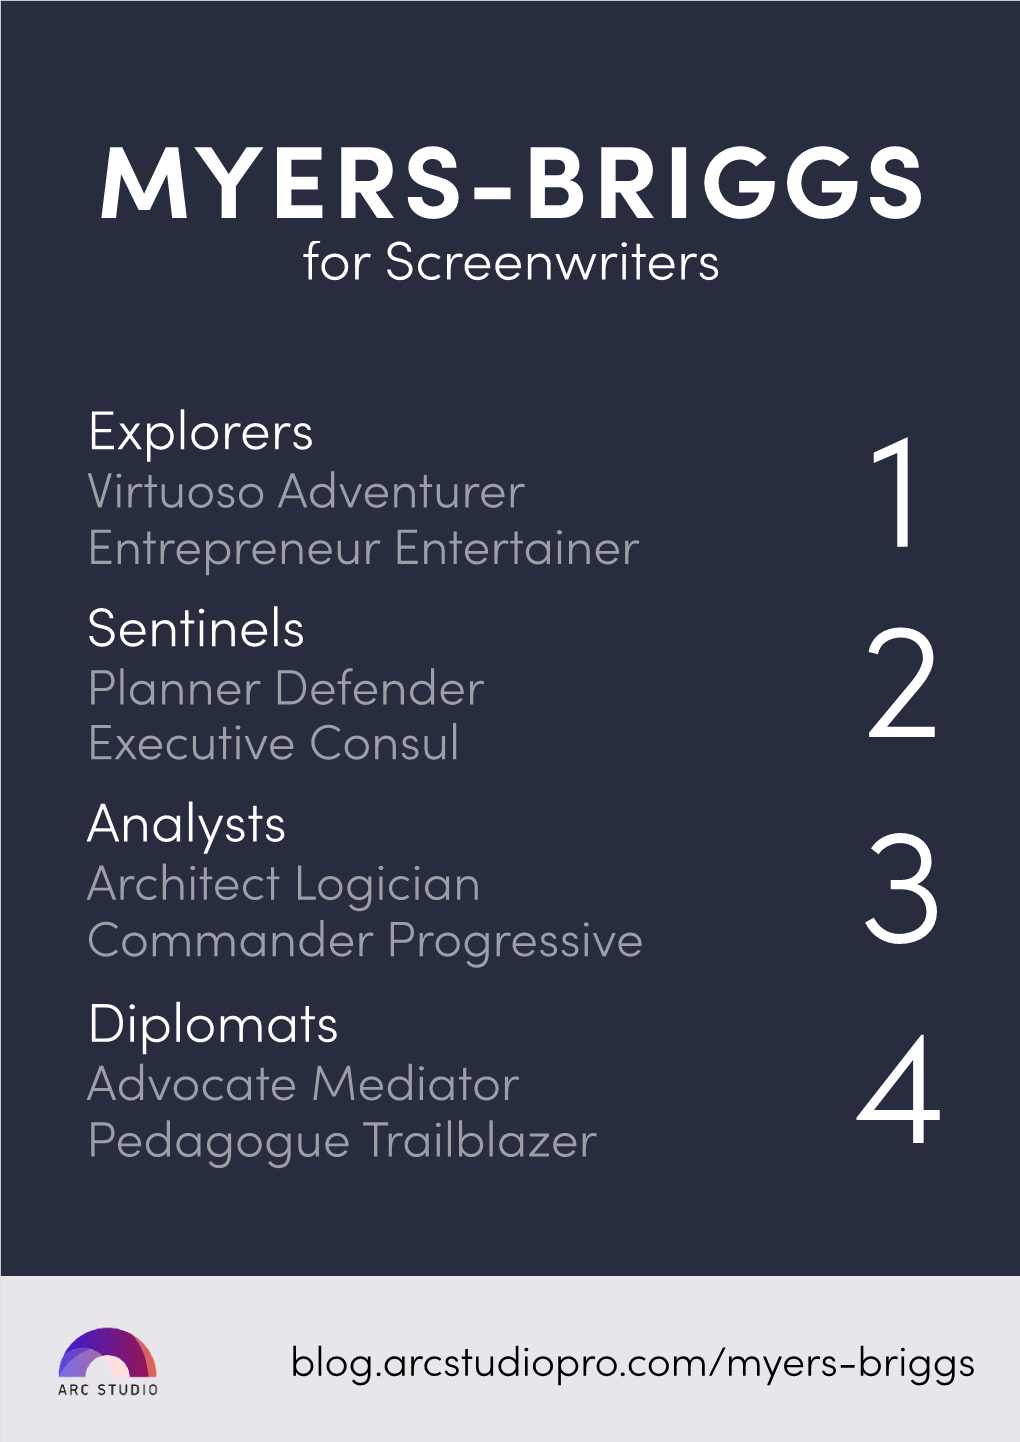 MYERS-BRIGGS for Screenwriters